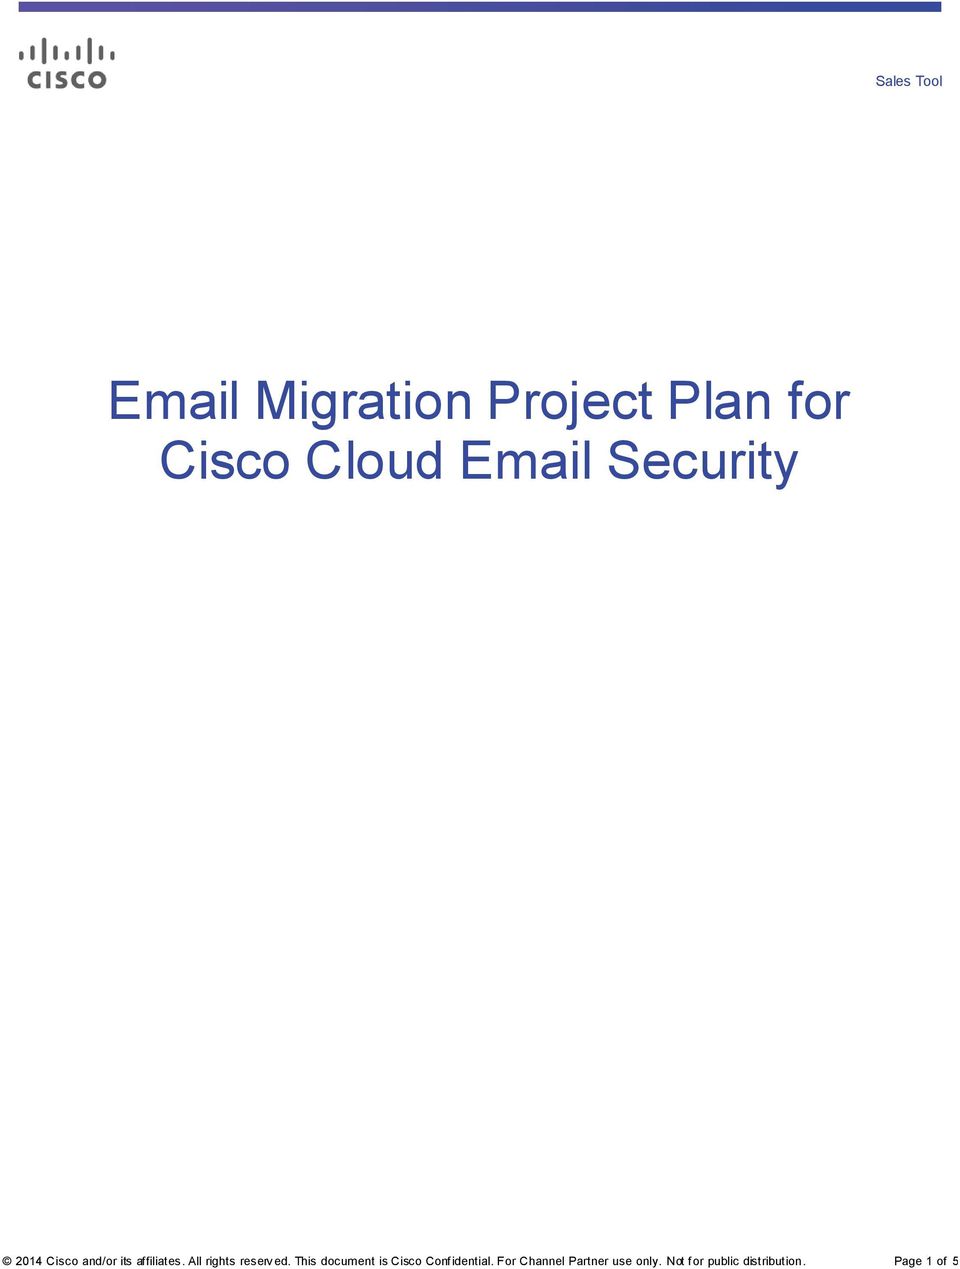 All rights reserv ed. This document is Cisco Conf idential.